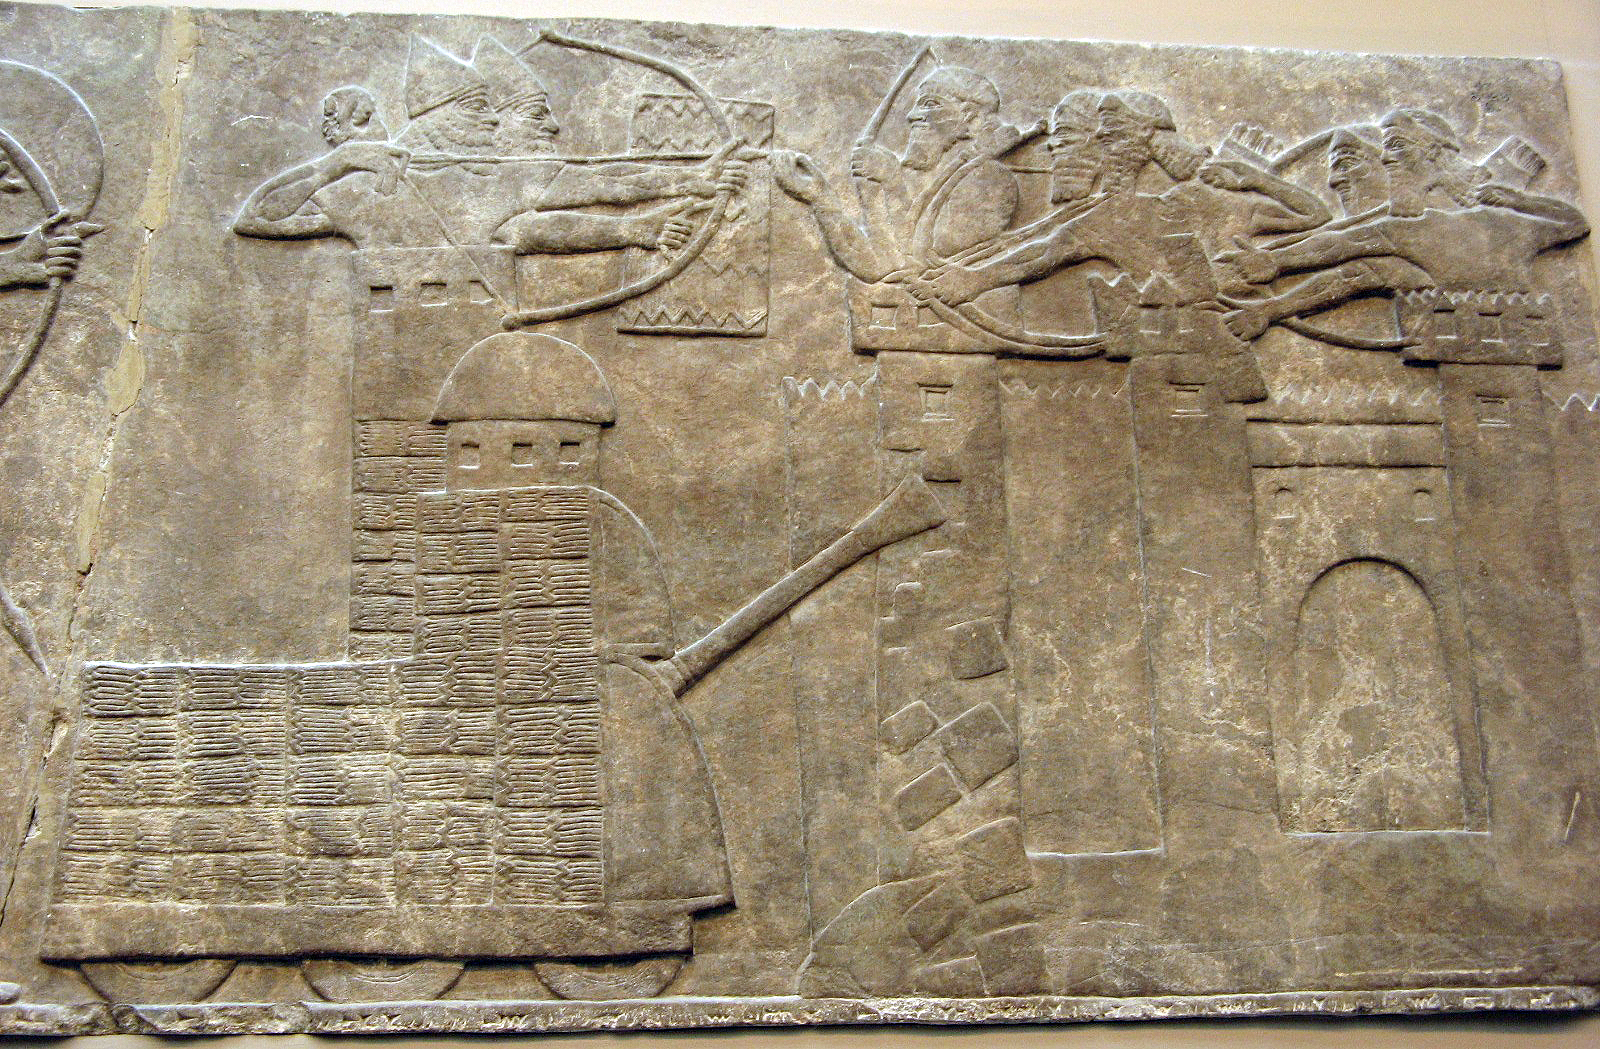 Assyrian_Attack_on_a_Town.jpg